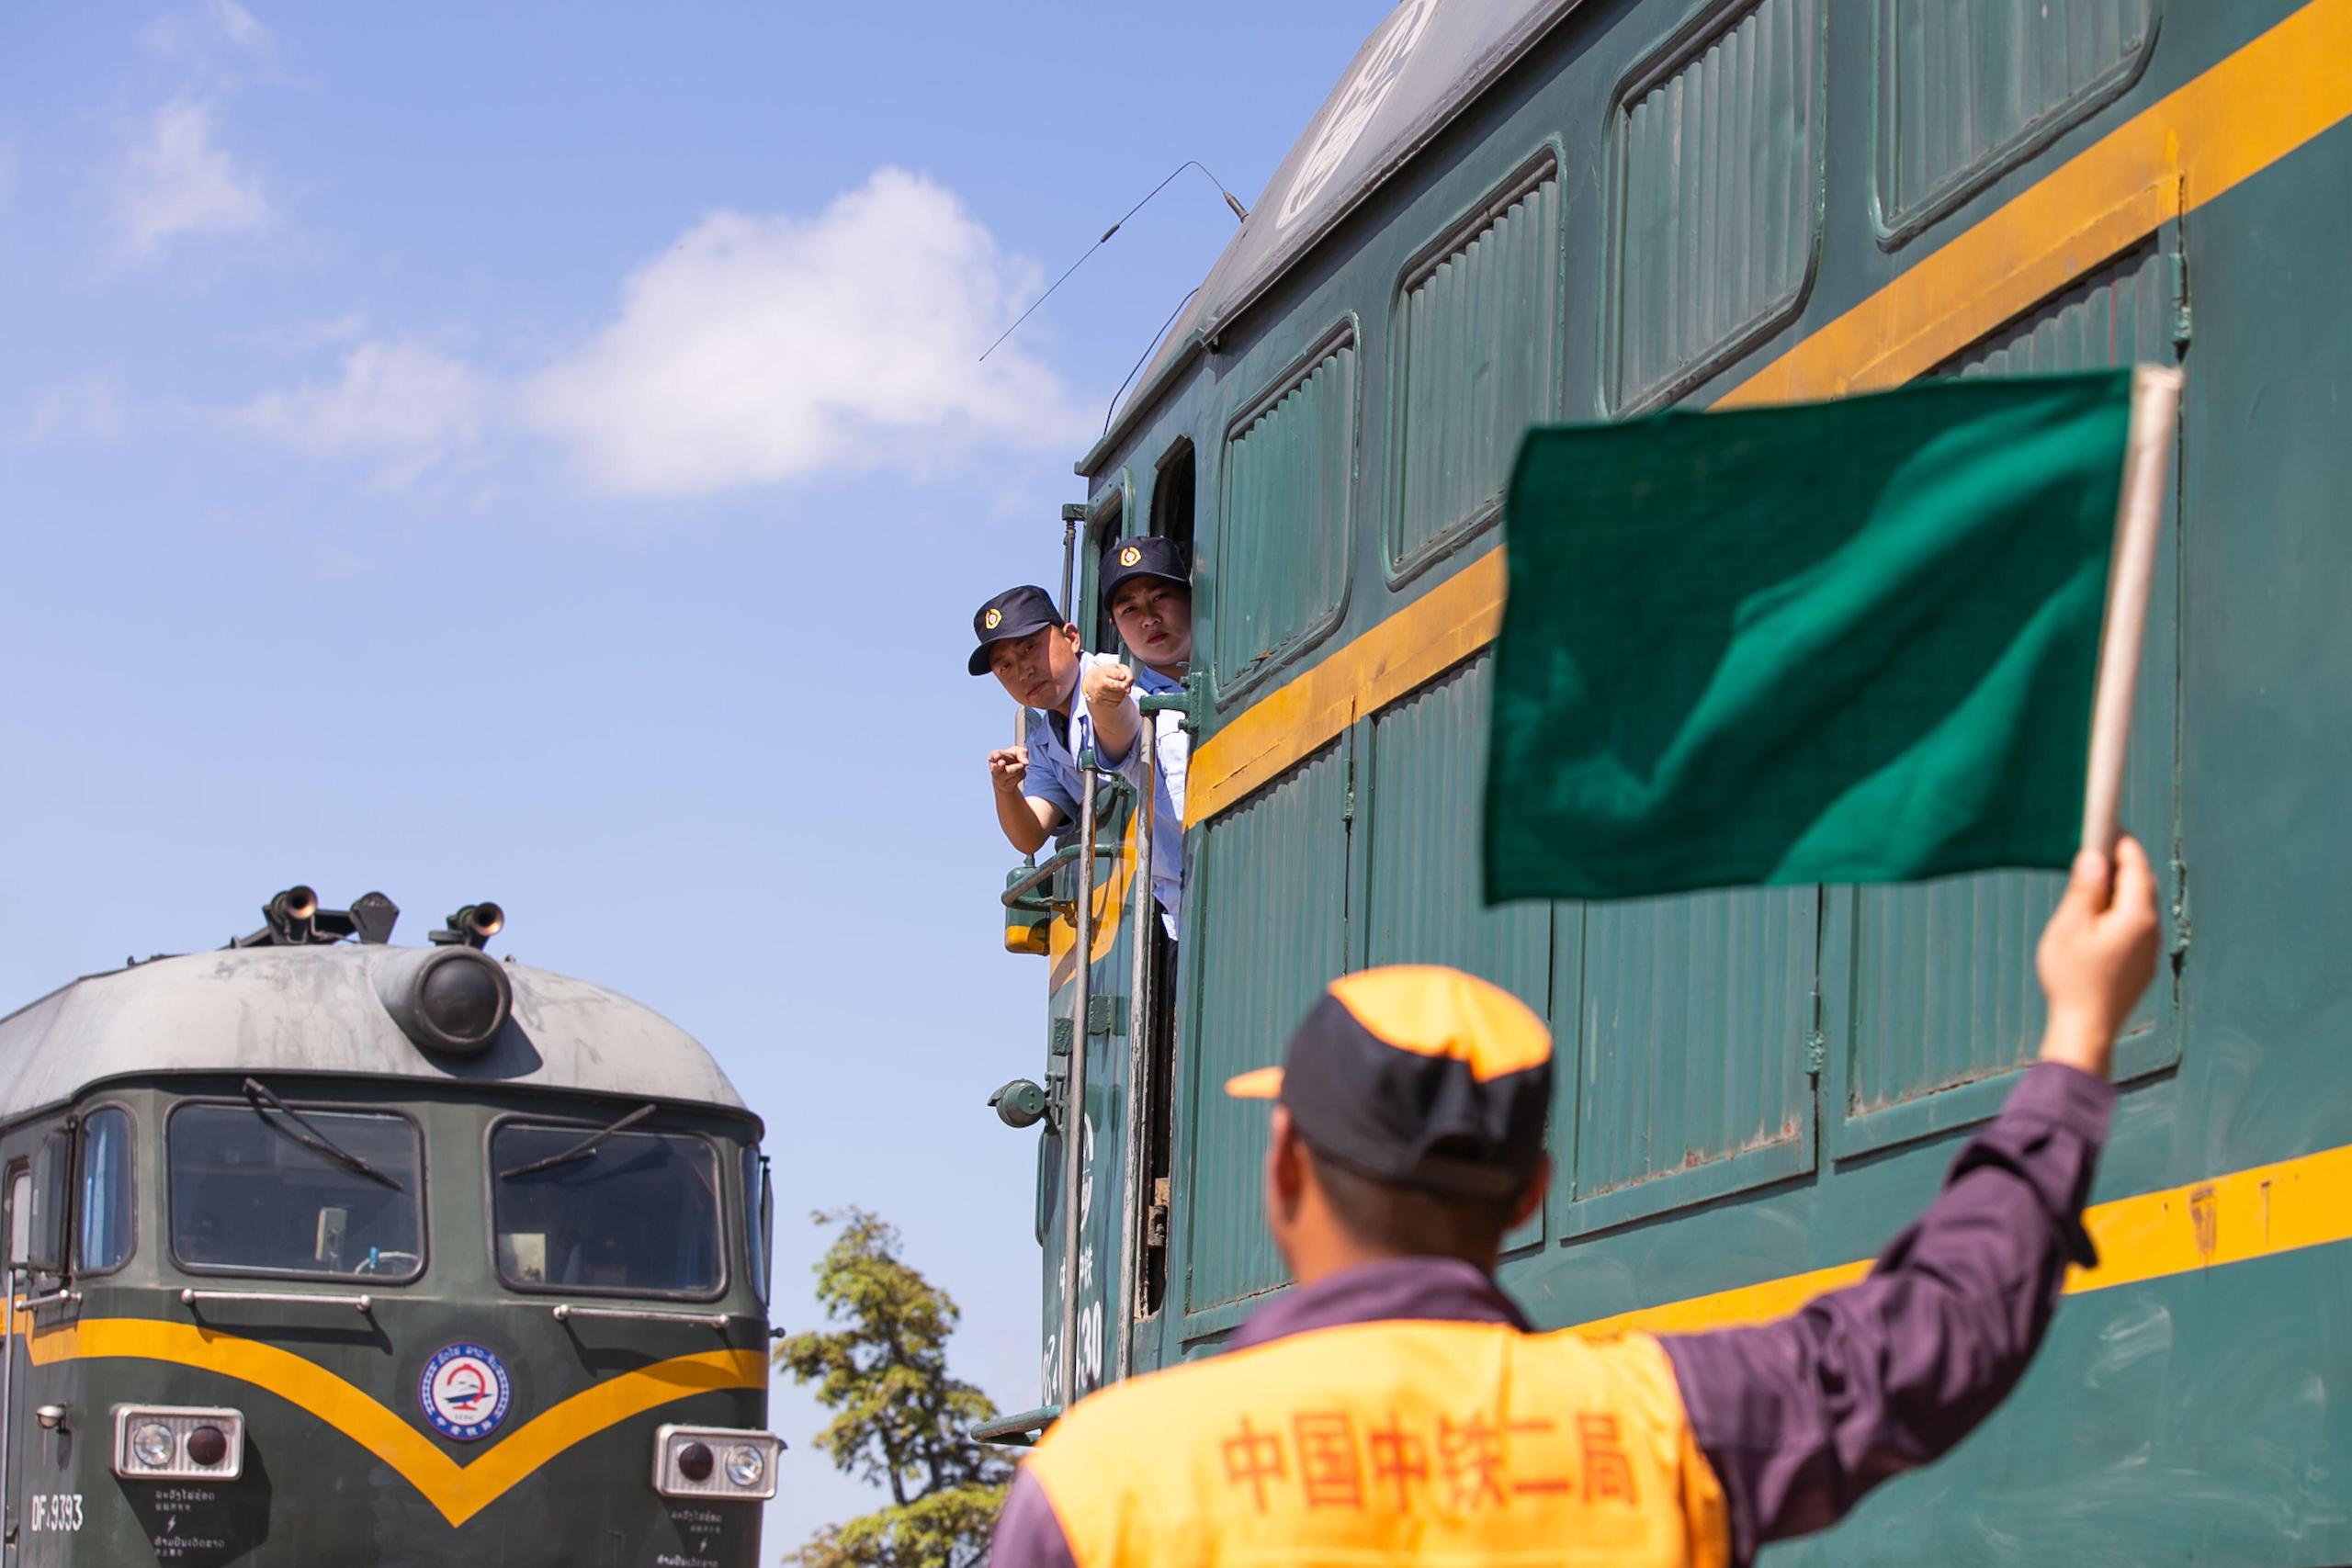 Training engineers on the China–Laos railway. China’s newest Belt and Road guidelines say companies working on transport infrastructure projects should “avoid nature reserves and important wildlife habitats.” (Image: Kaikeo Saiyasane / Alamy)